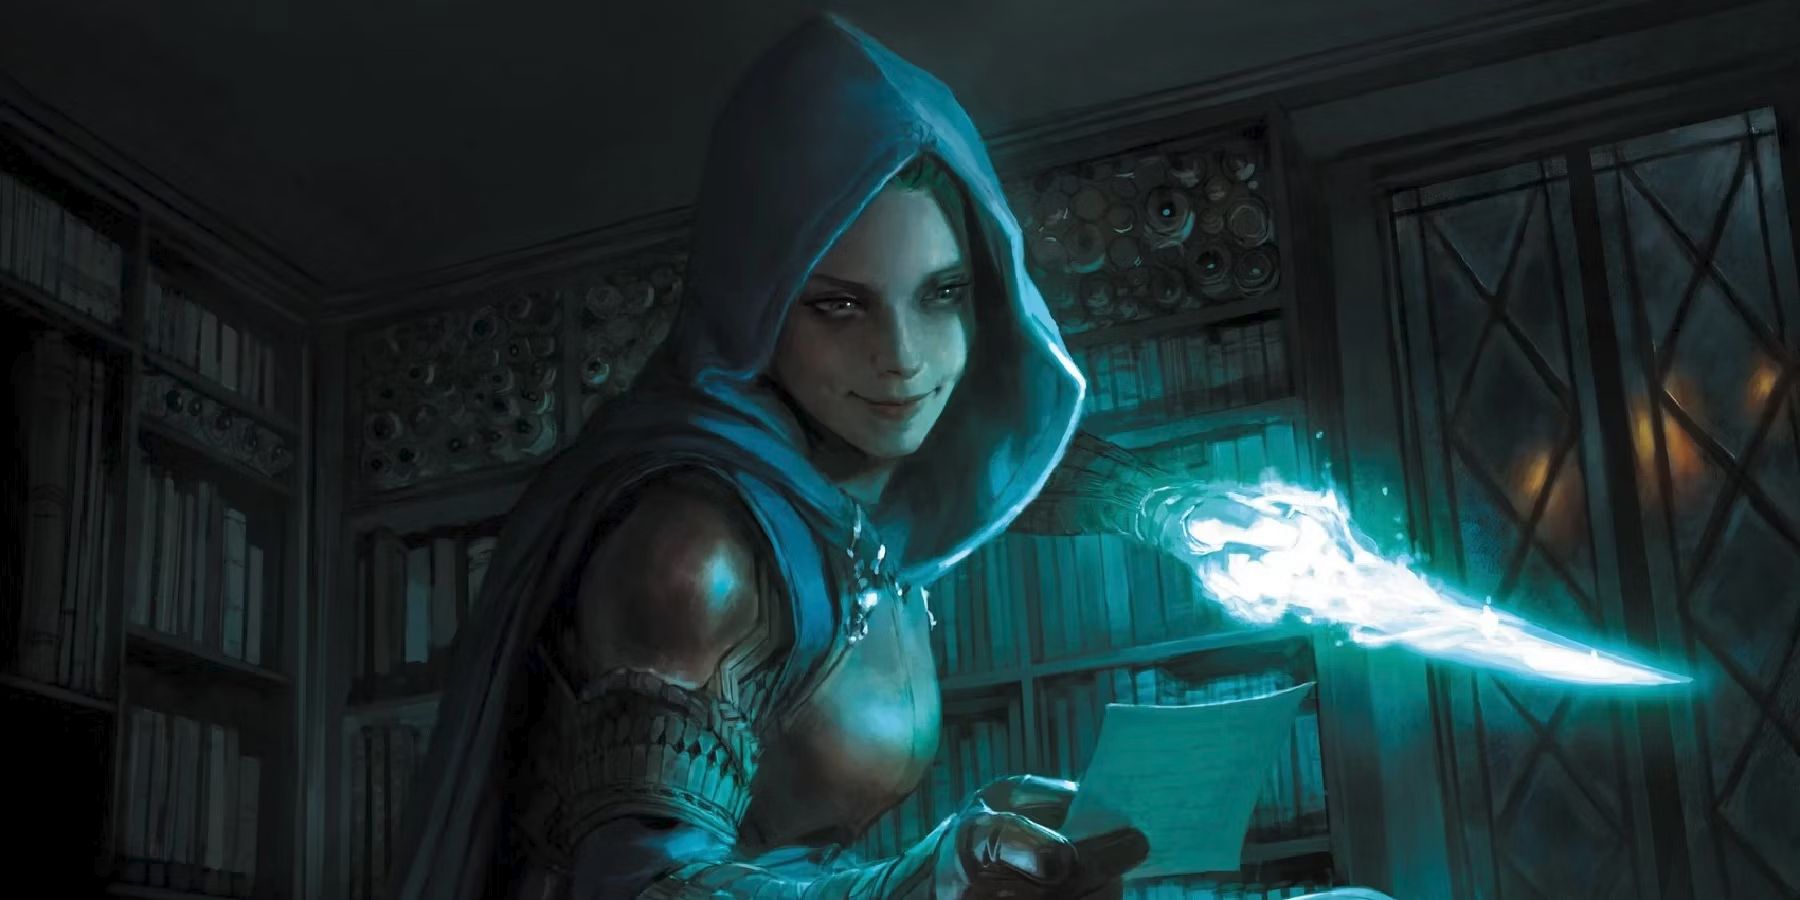 A hooded rogue winds up a strike with a blue-glowing dagger in artwork from Dungeons & Dragons.